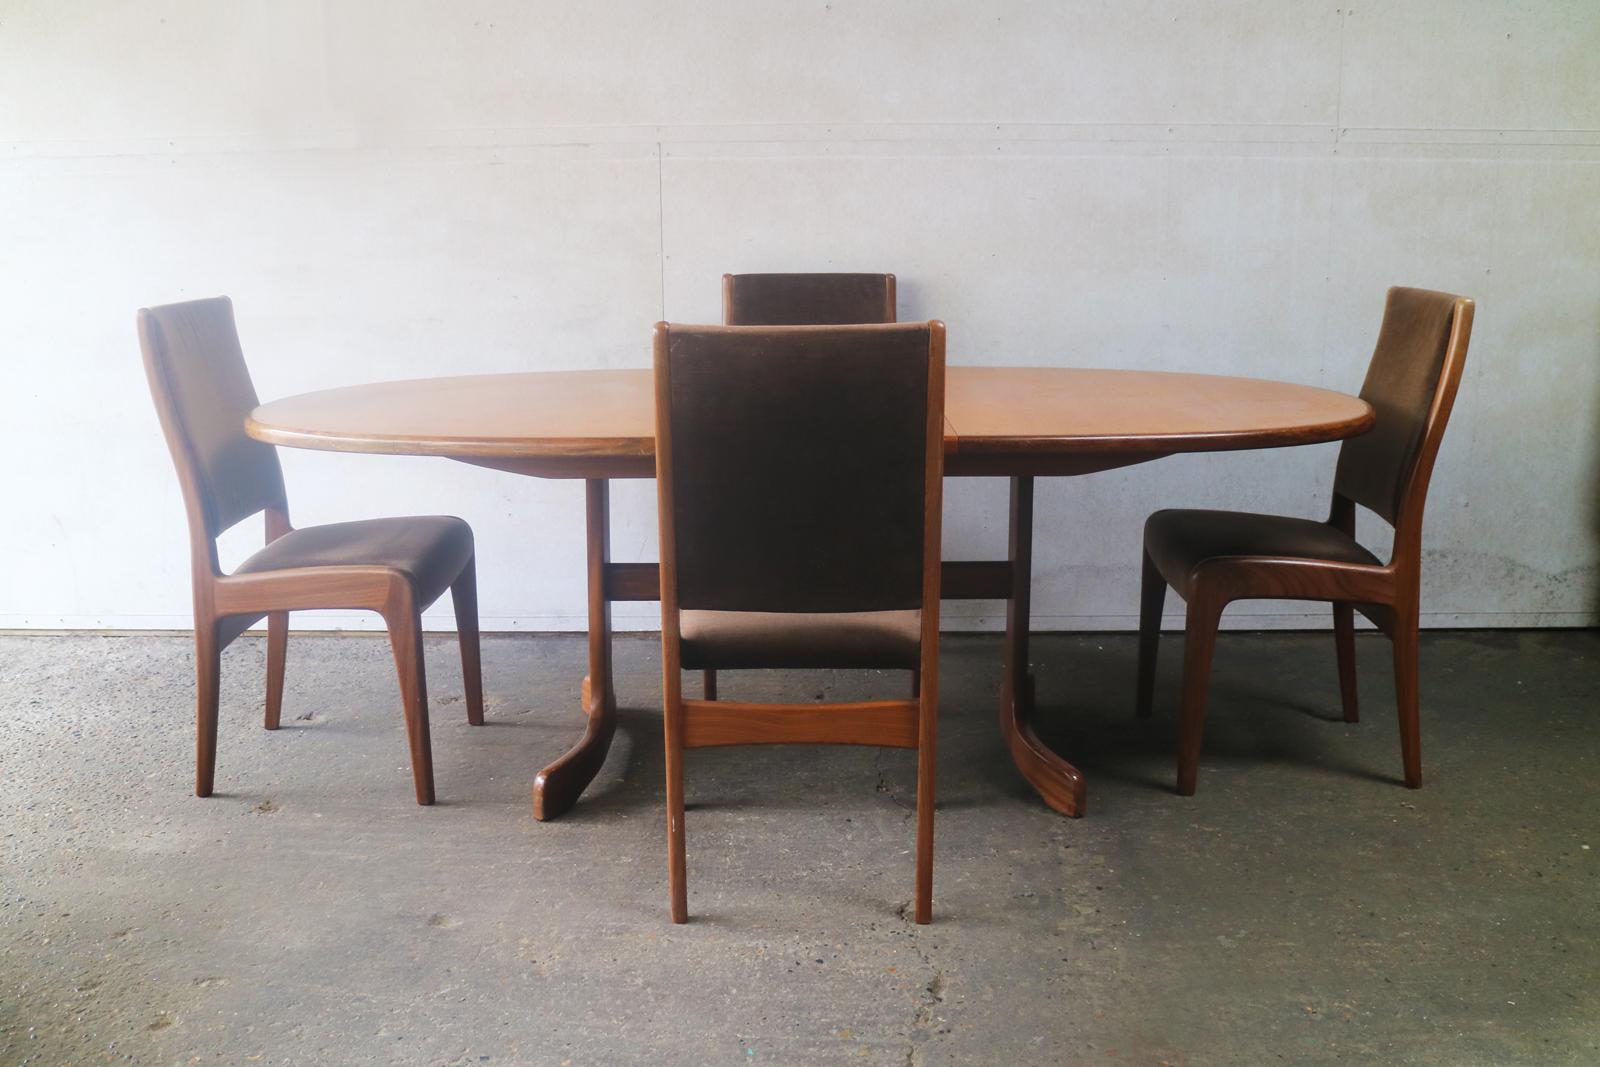 A large G plan extending ellipse shaped teak dining table with a matching, very elegant set of dining chairs upholstered in the original mushroom colored velour. The sculpted frames are in polished teak.

The dining table has a lovely smooth